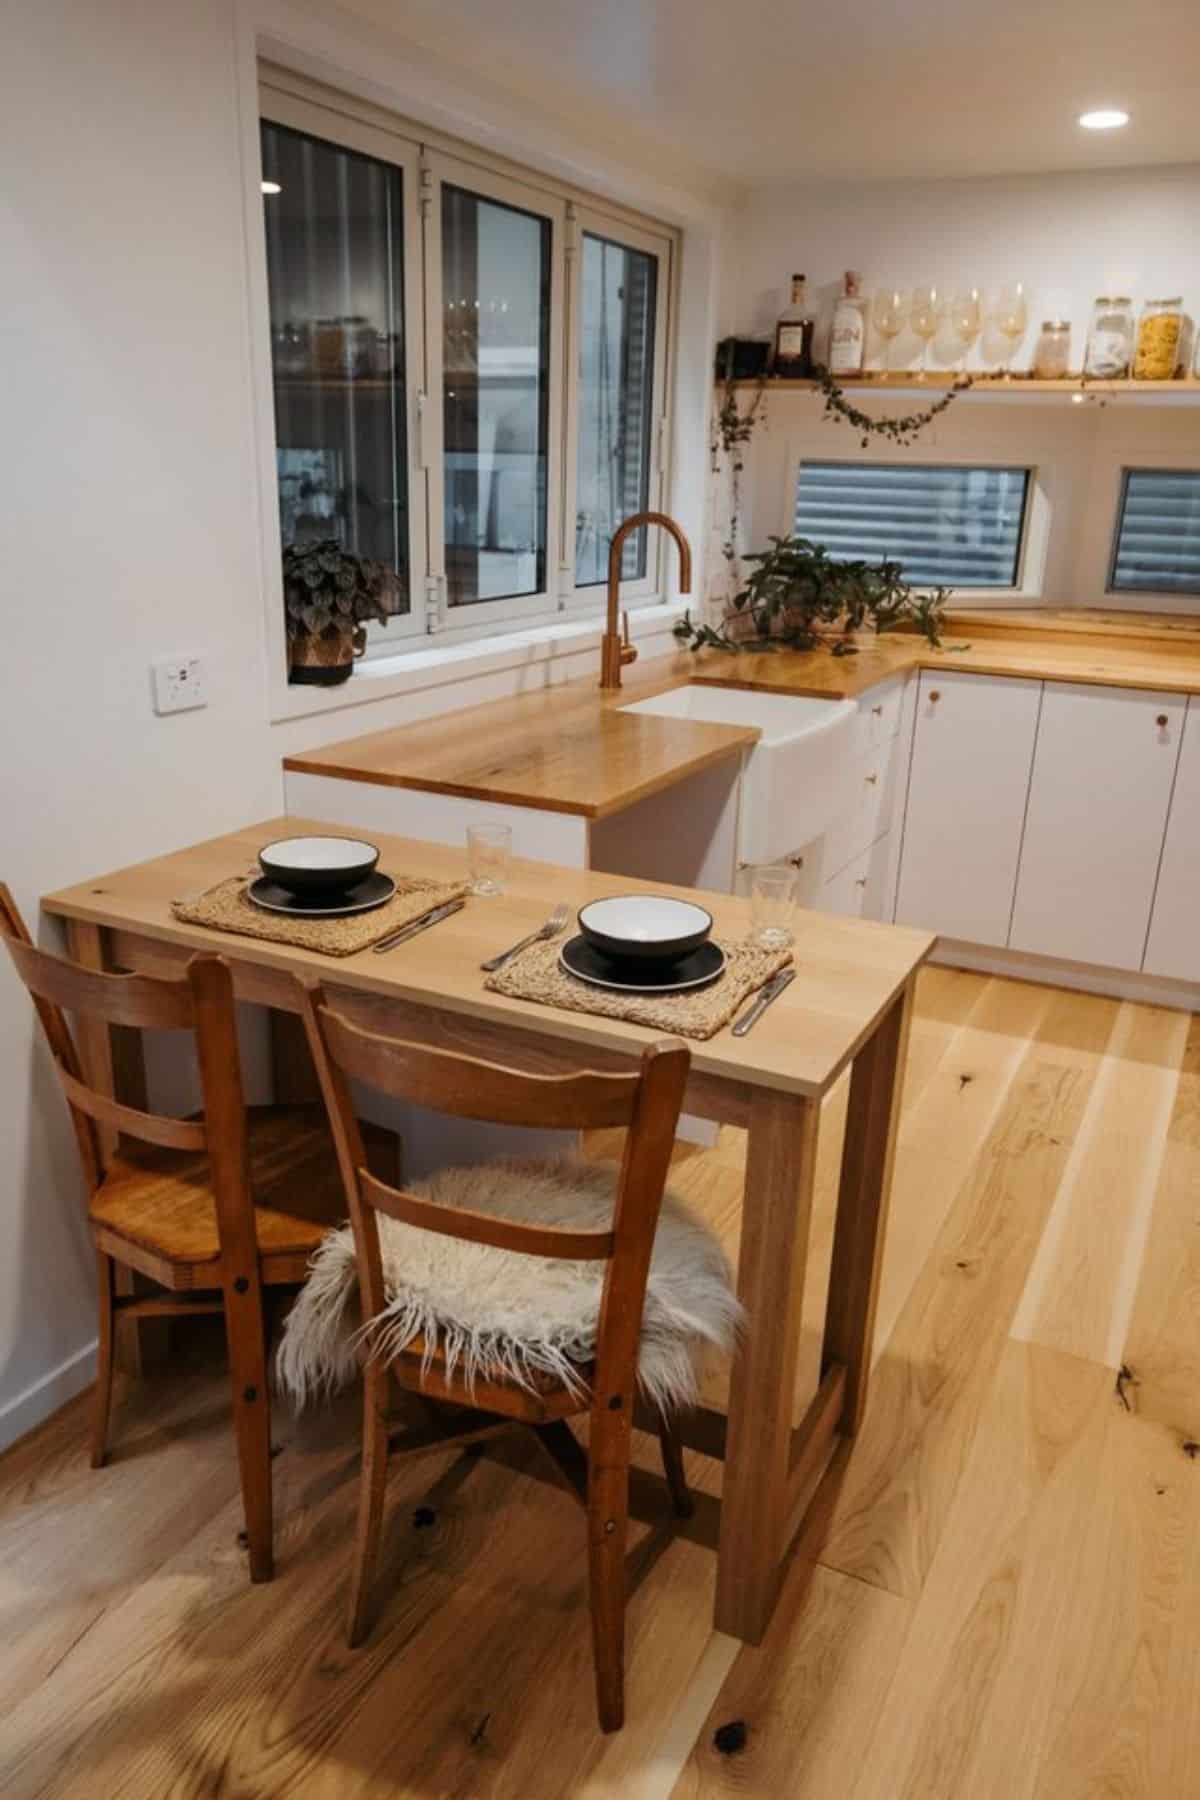 dining table besides the kitchen area